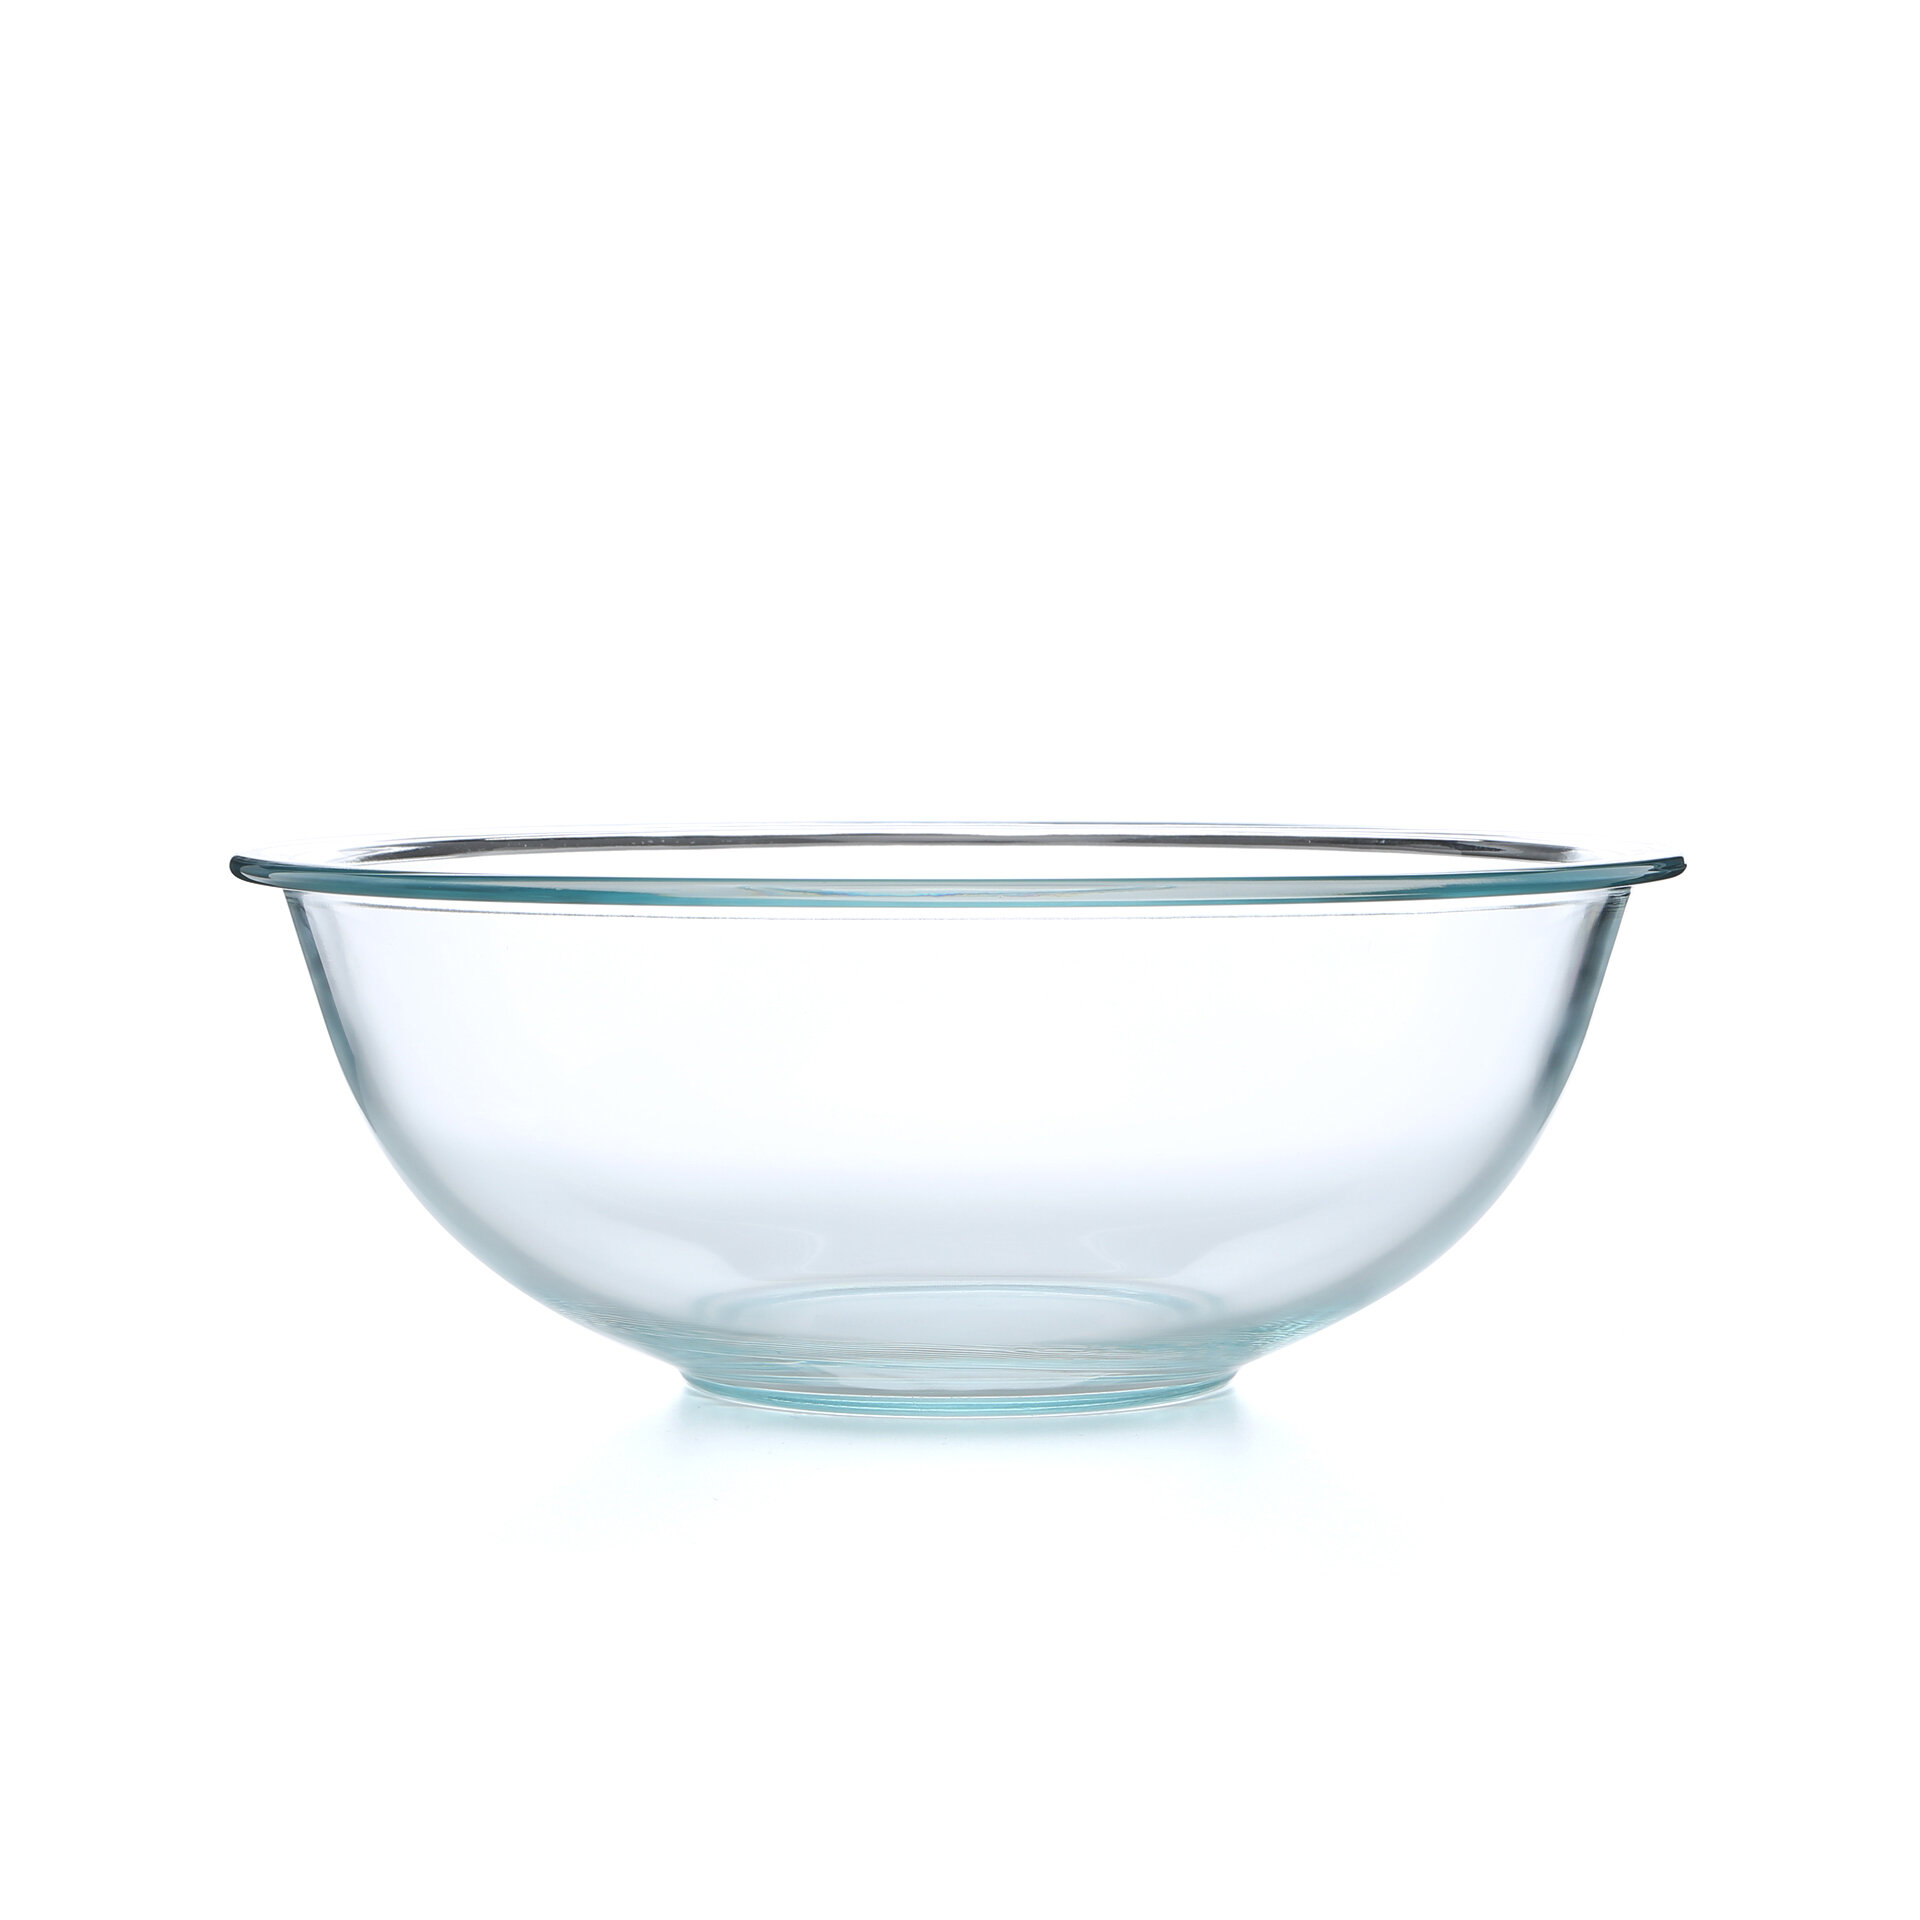 Mixing Bowl Tableware Bowl Glass Mixing Bowl 2L Large Thick Glass Cooking & Baking Bowl 